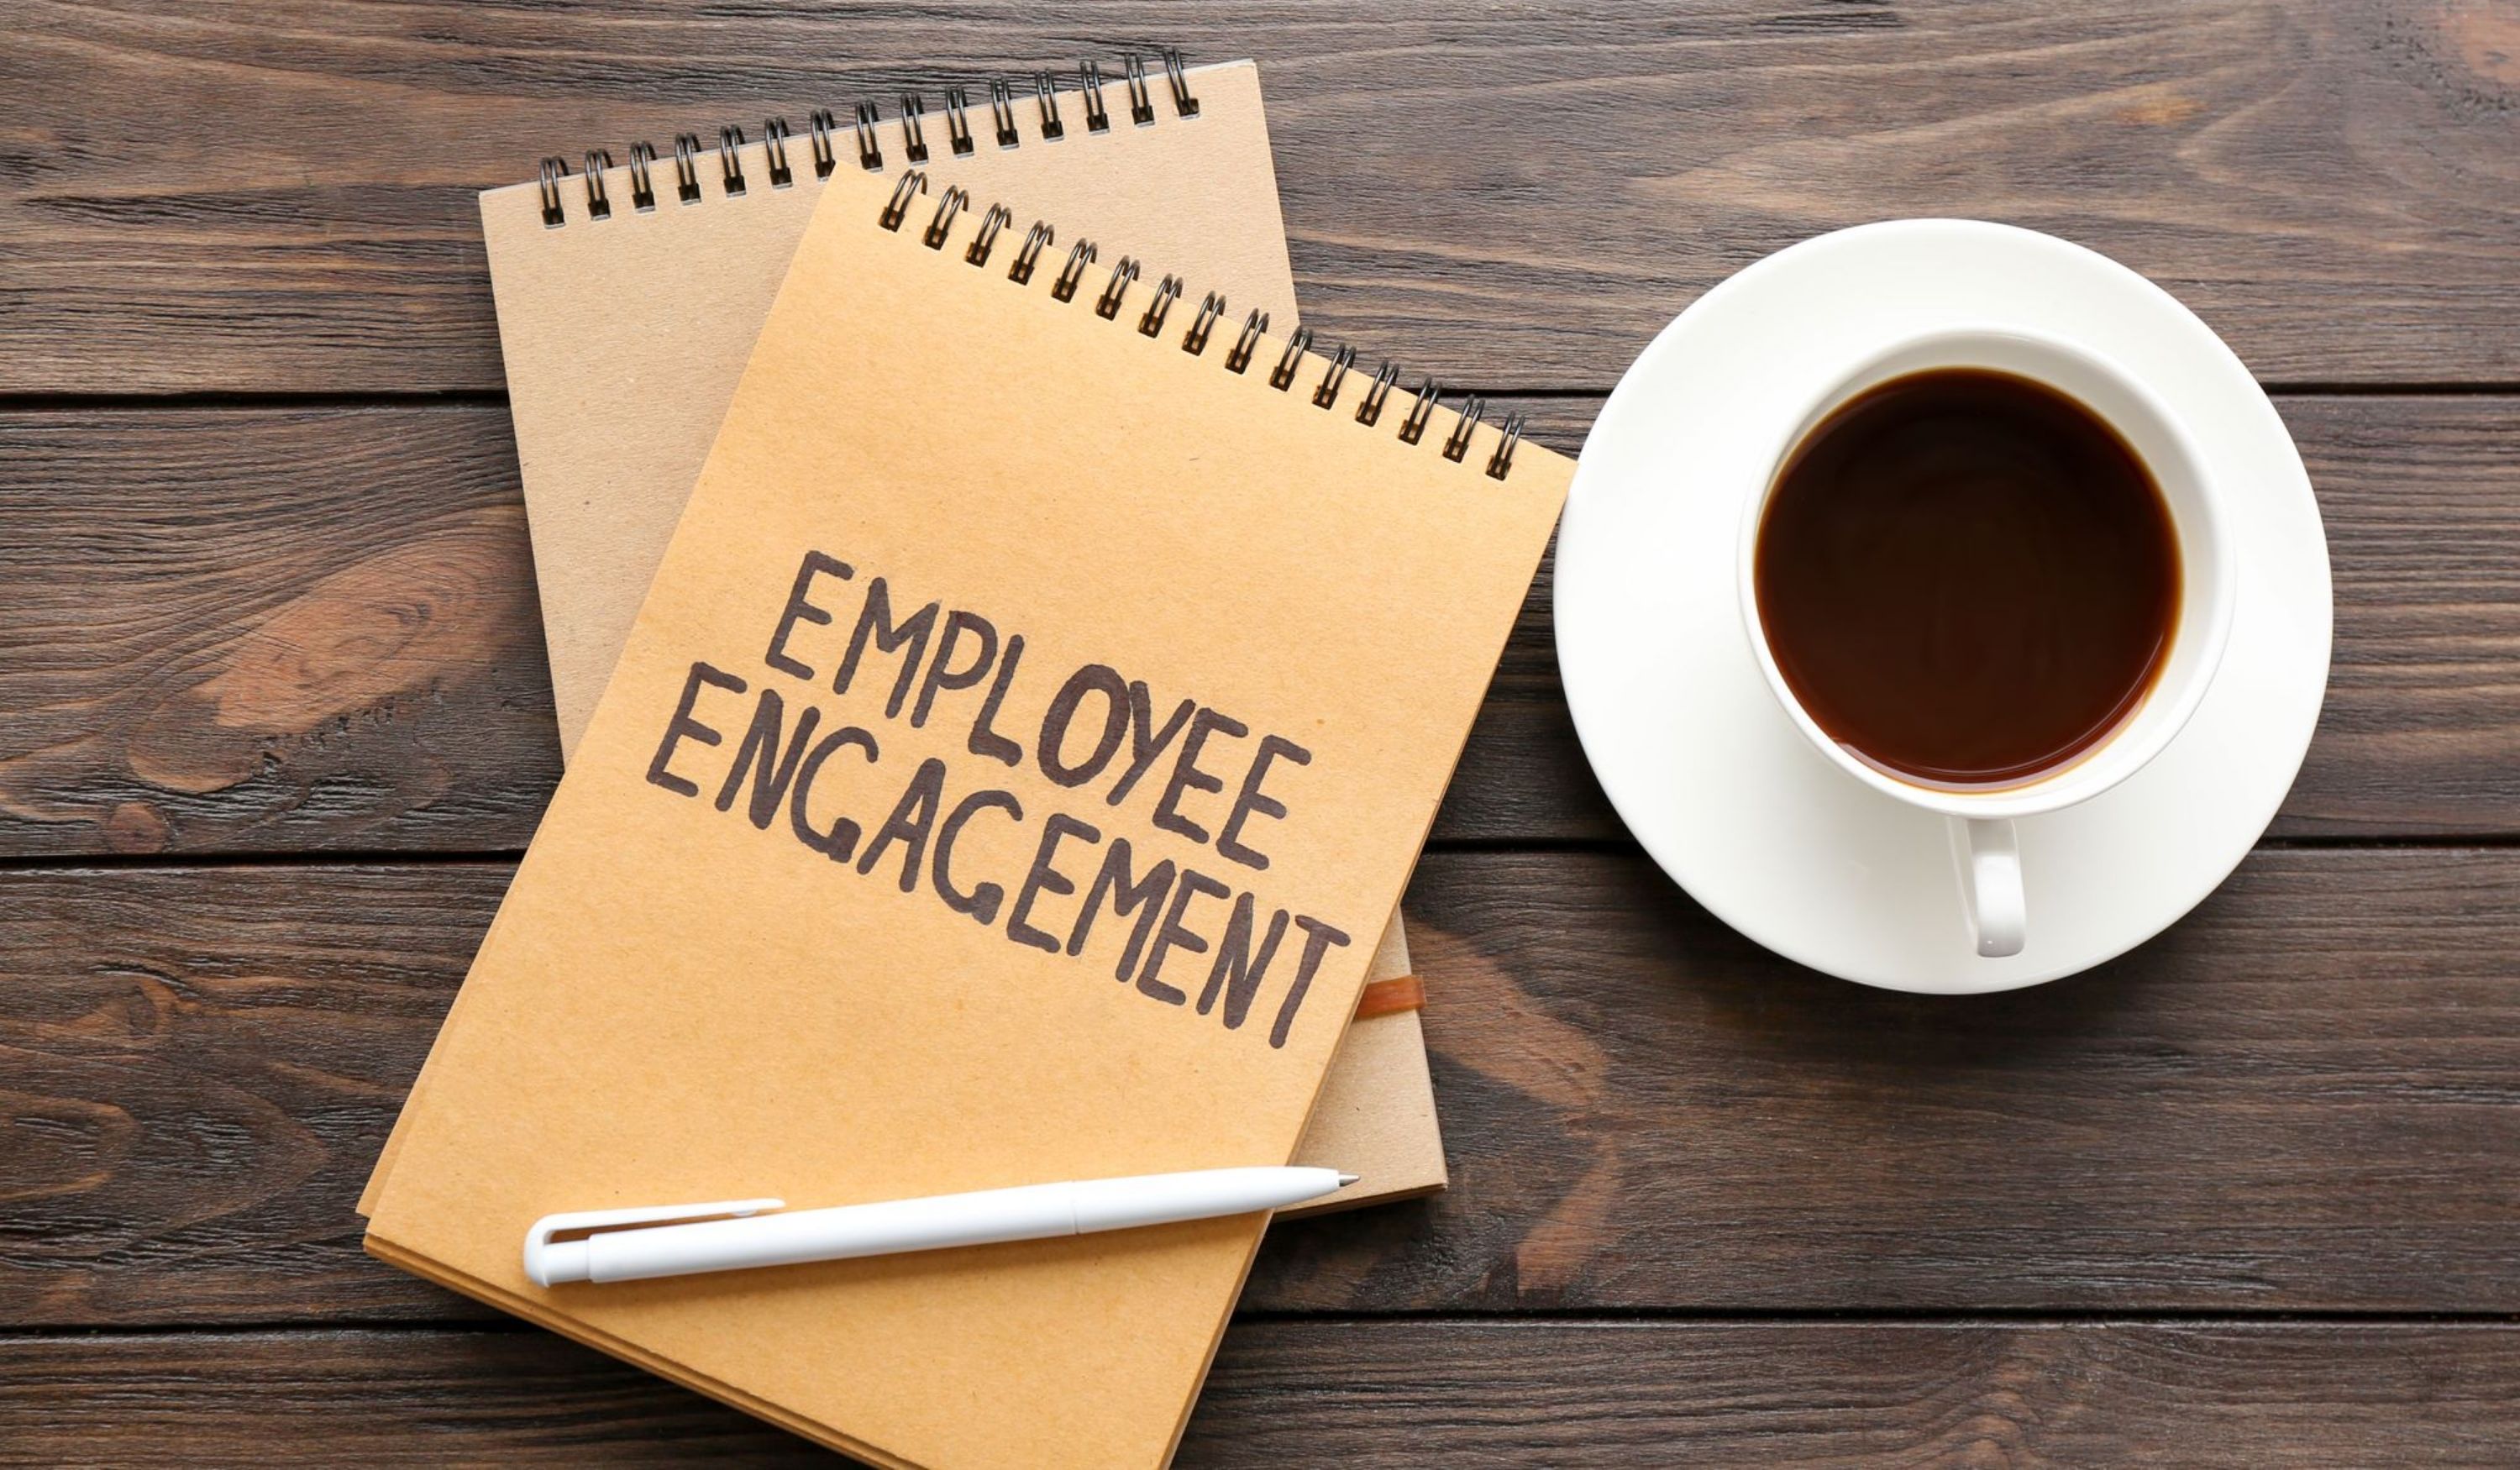 Why Employee Engagement is a must have for any Organization